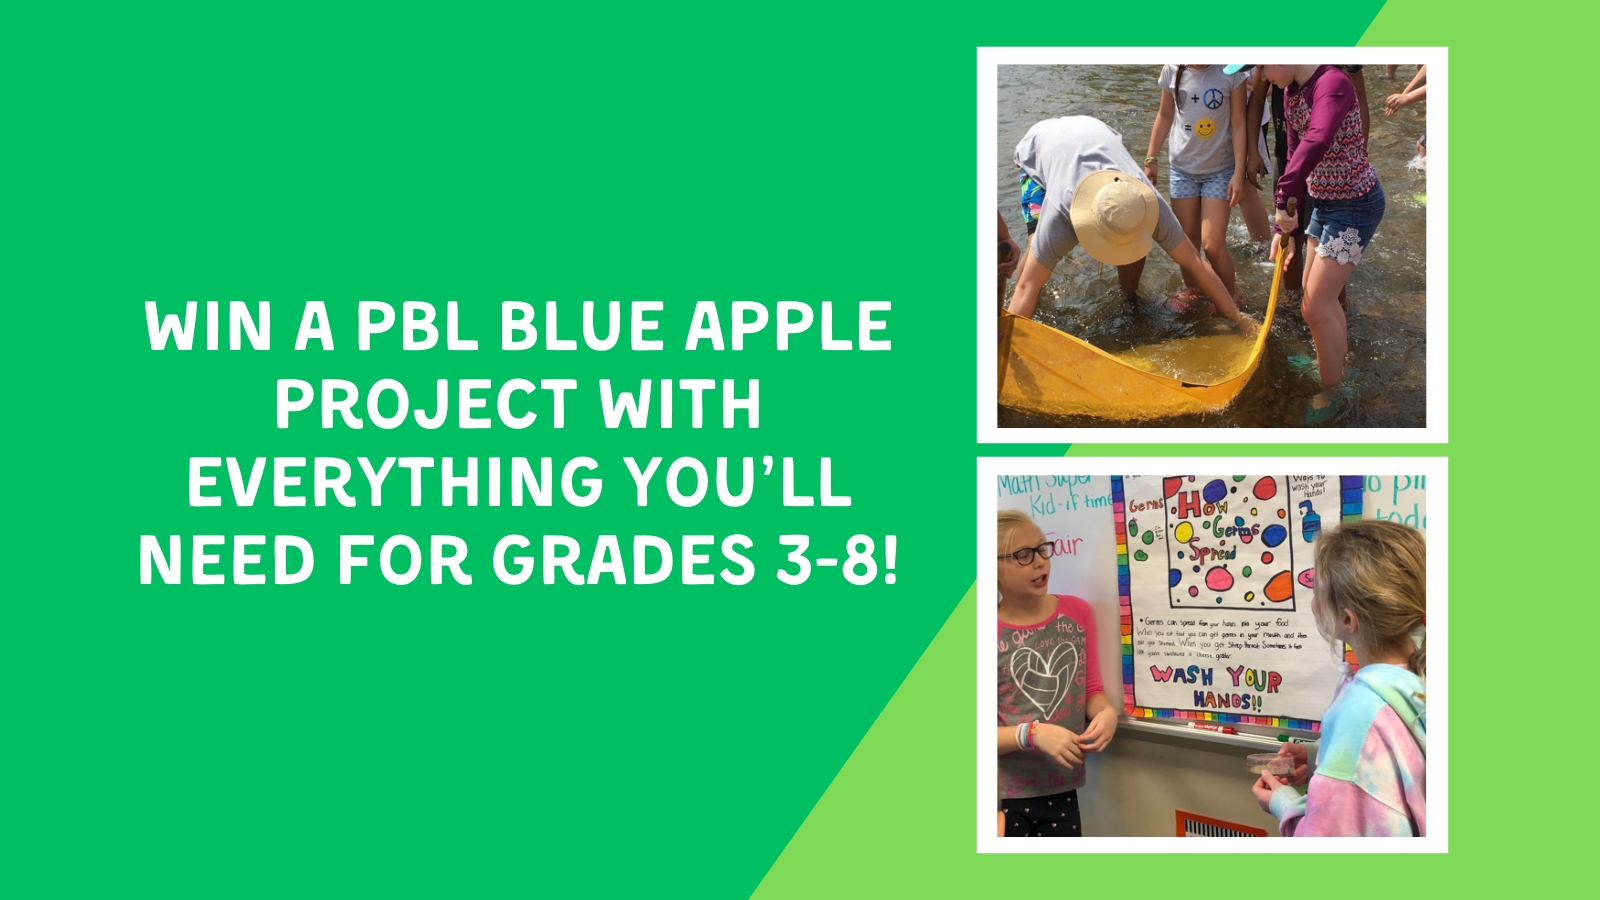 Students doing Blue Apple projects with text 'Win a PBL Blue Apple Project with Everything You'll Need for Grades 3-8!'